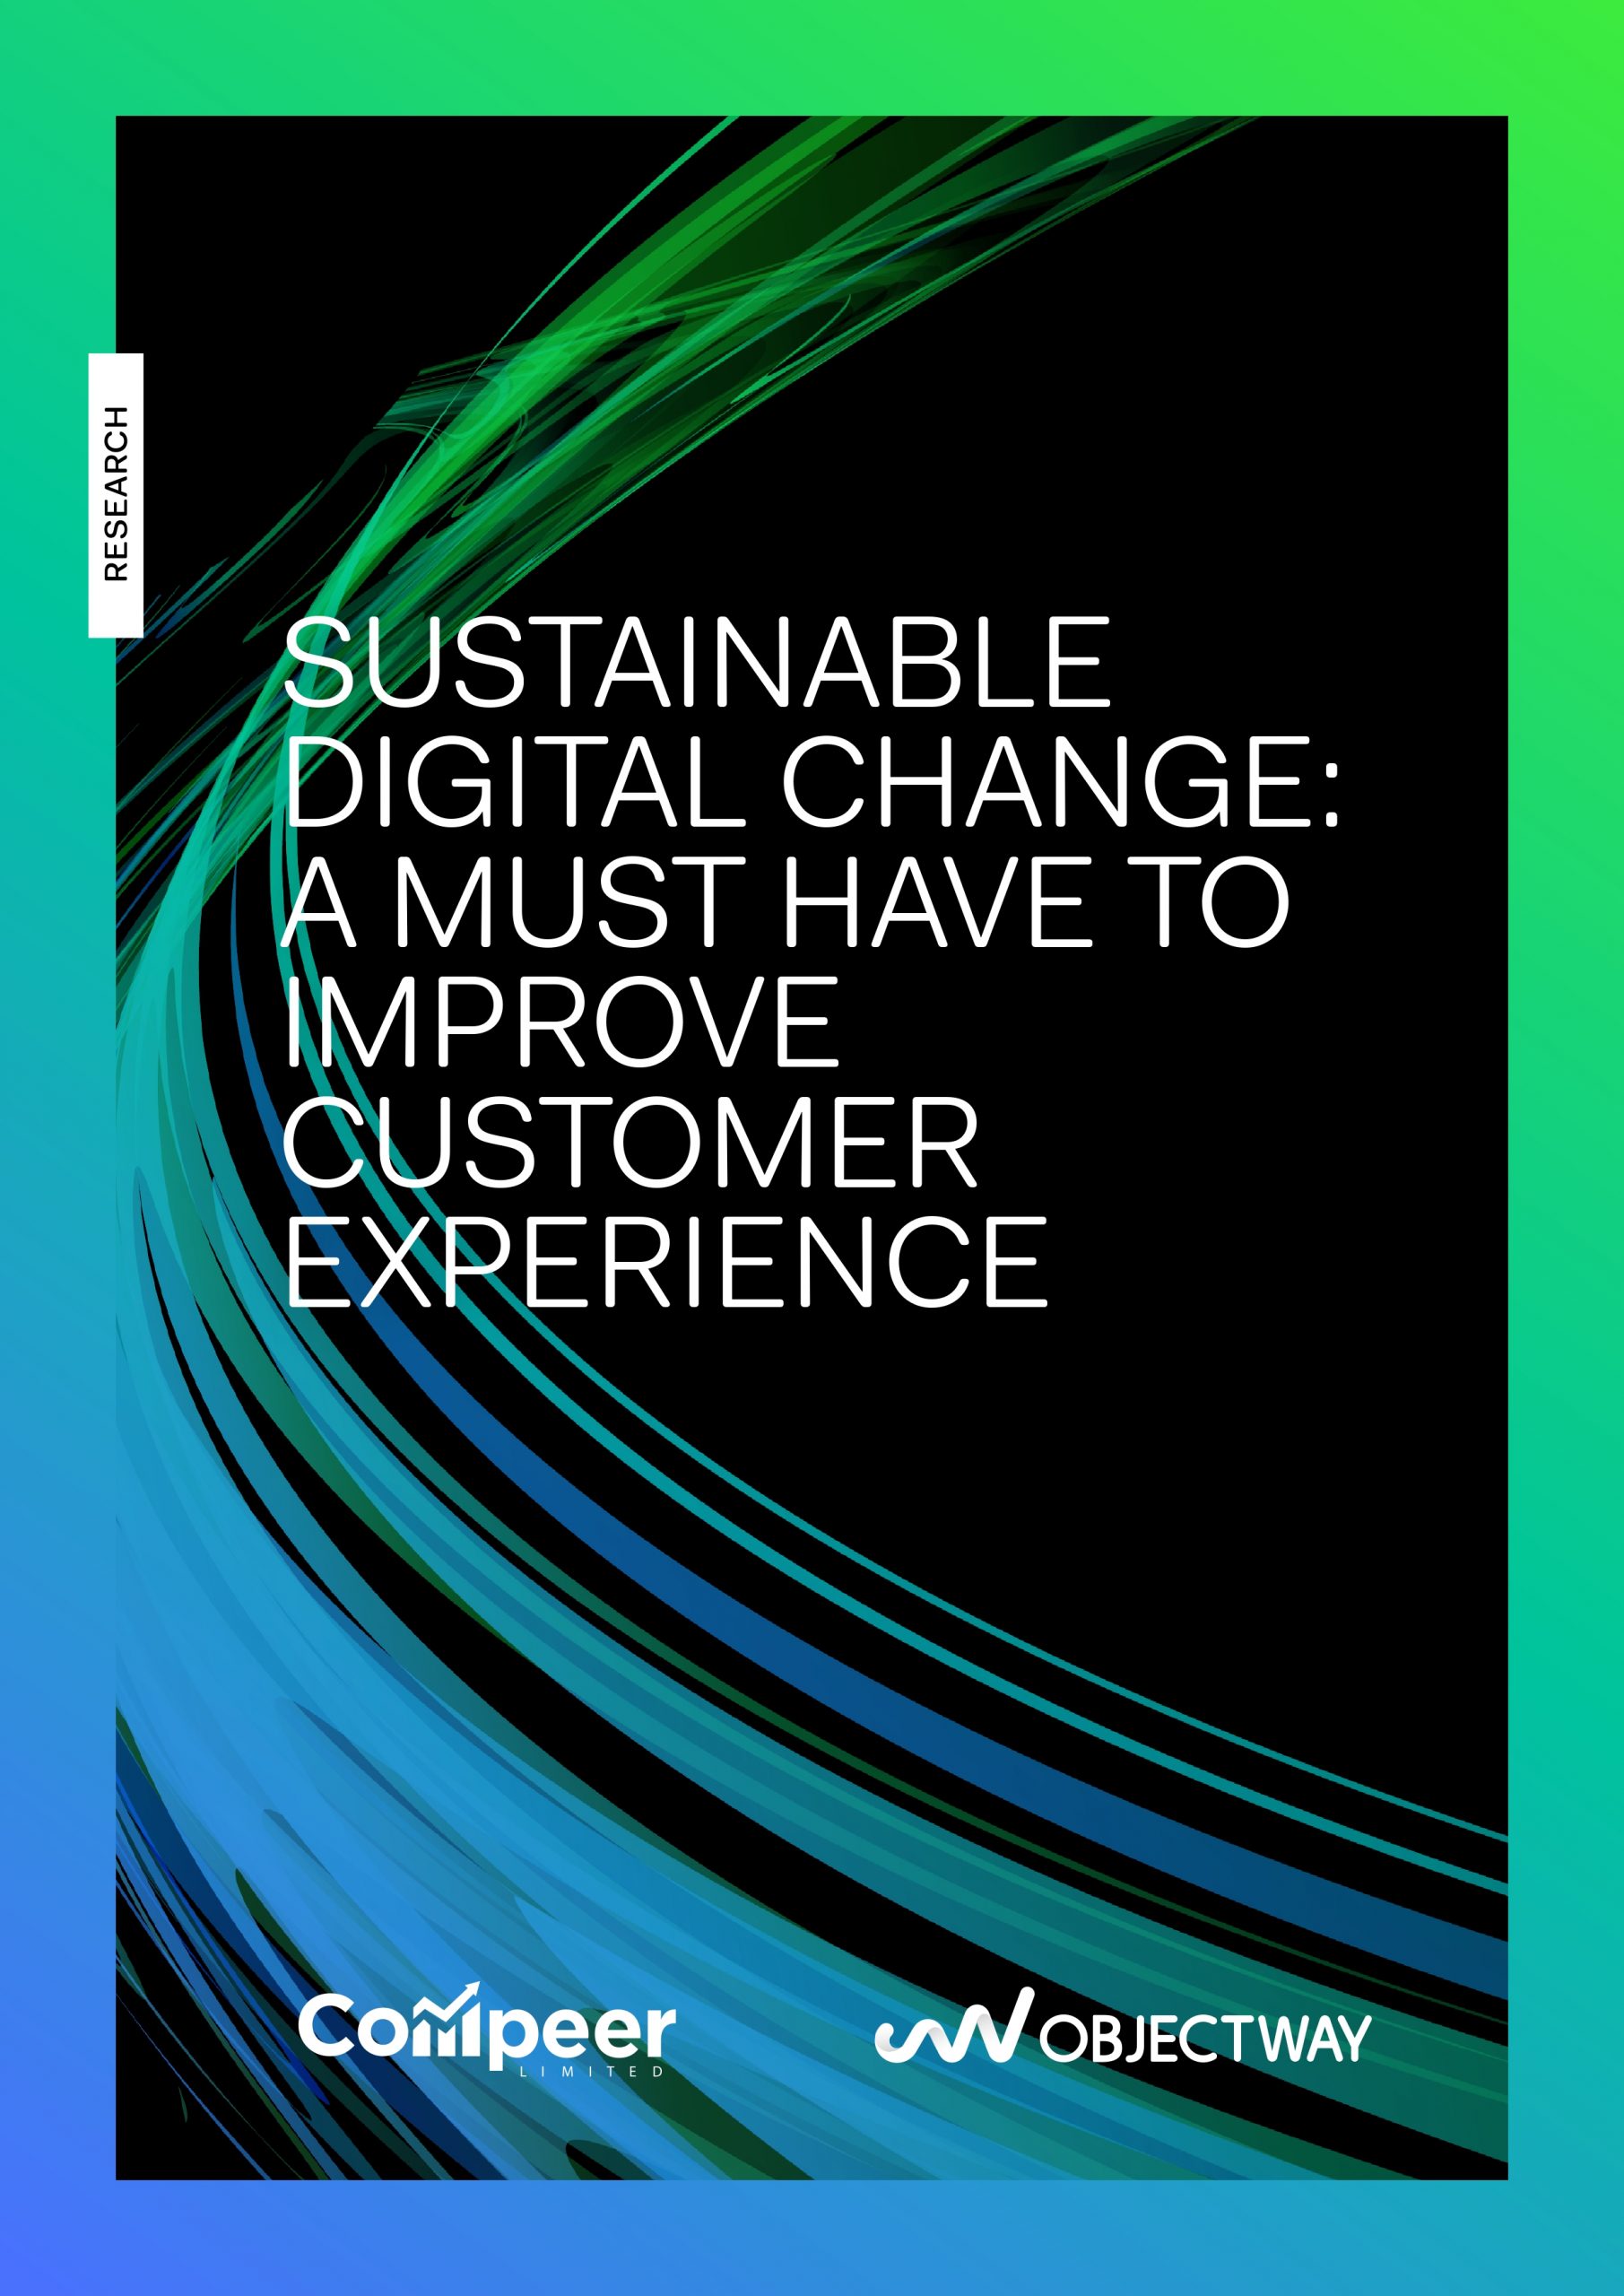 Objectway & Compeer Analyst Research Cover Sustainable Digital Change: a must have to improve customer experience.